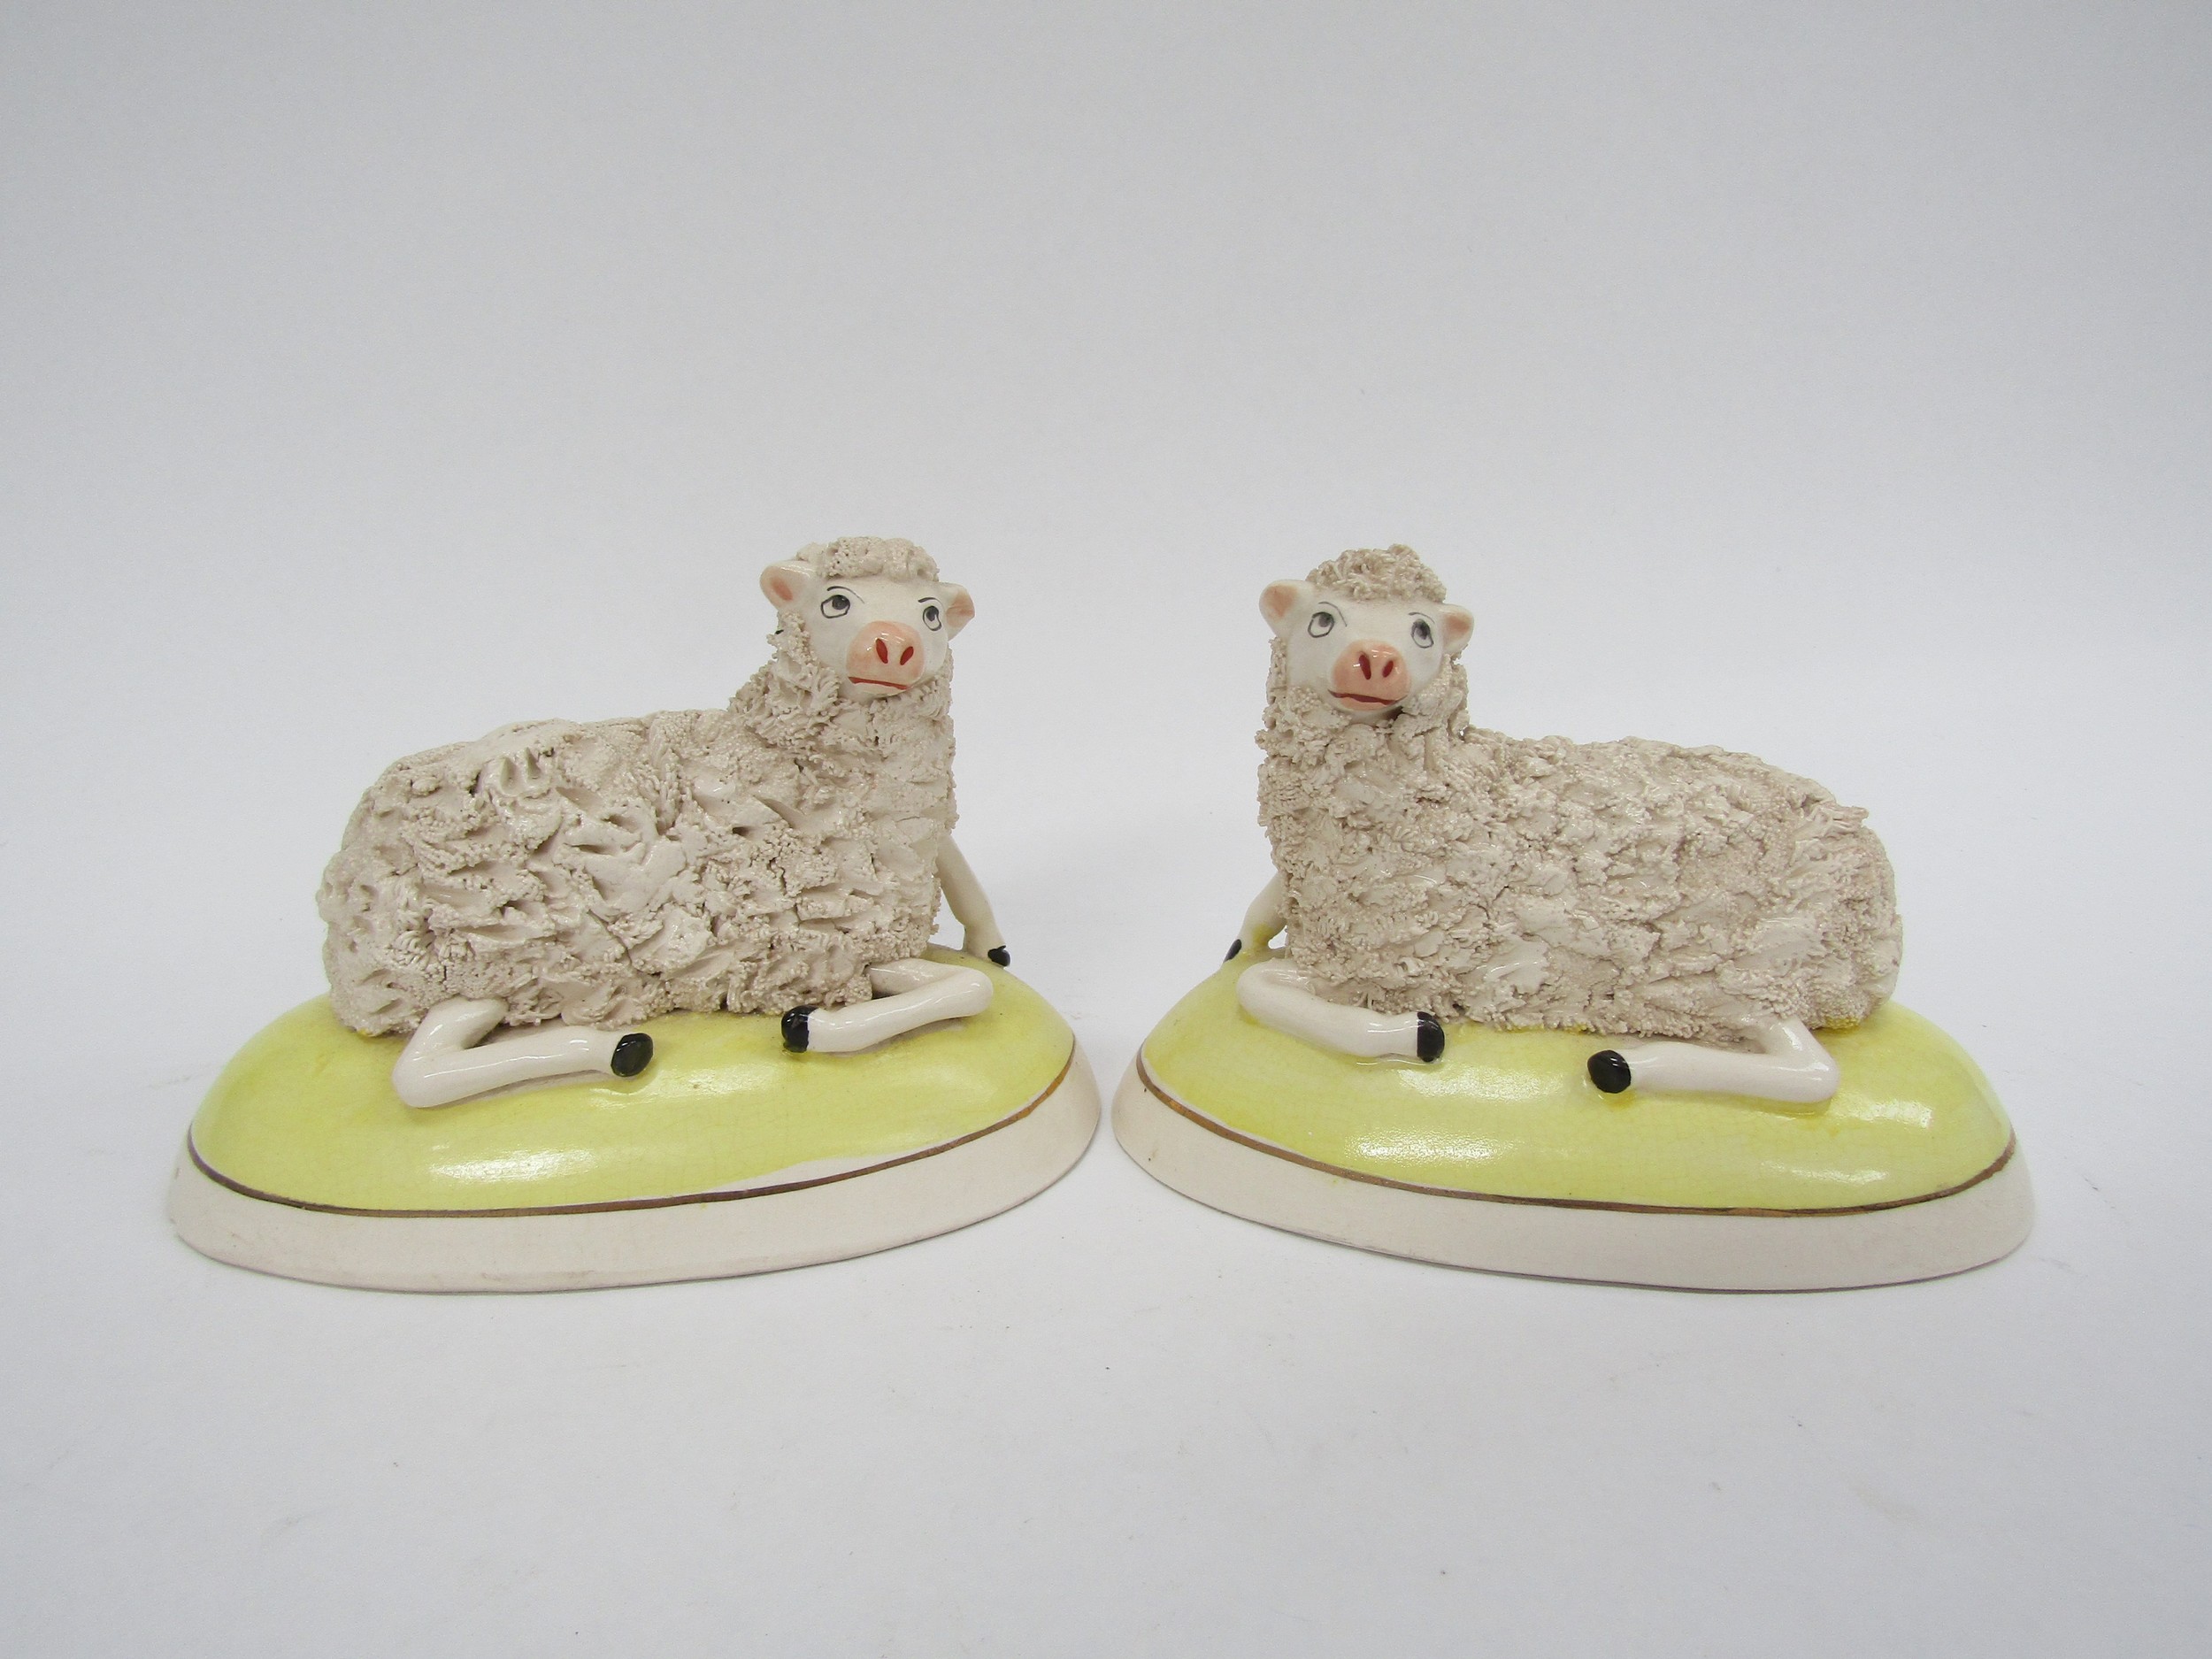 A pair of Staffordshire sheep in yellow domed bases (slight damage), 9cm x 14cm